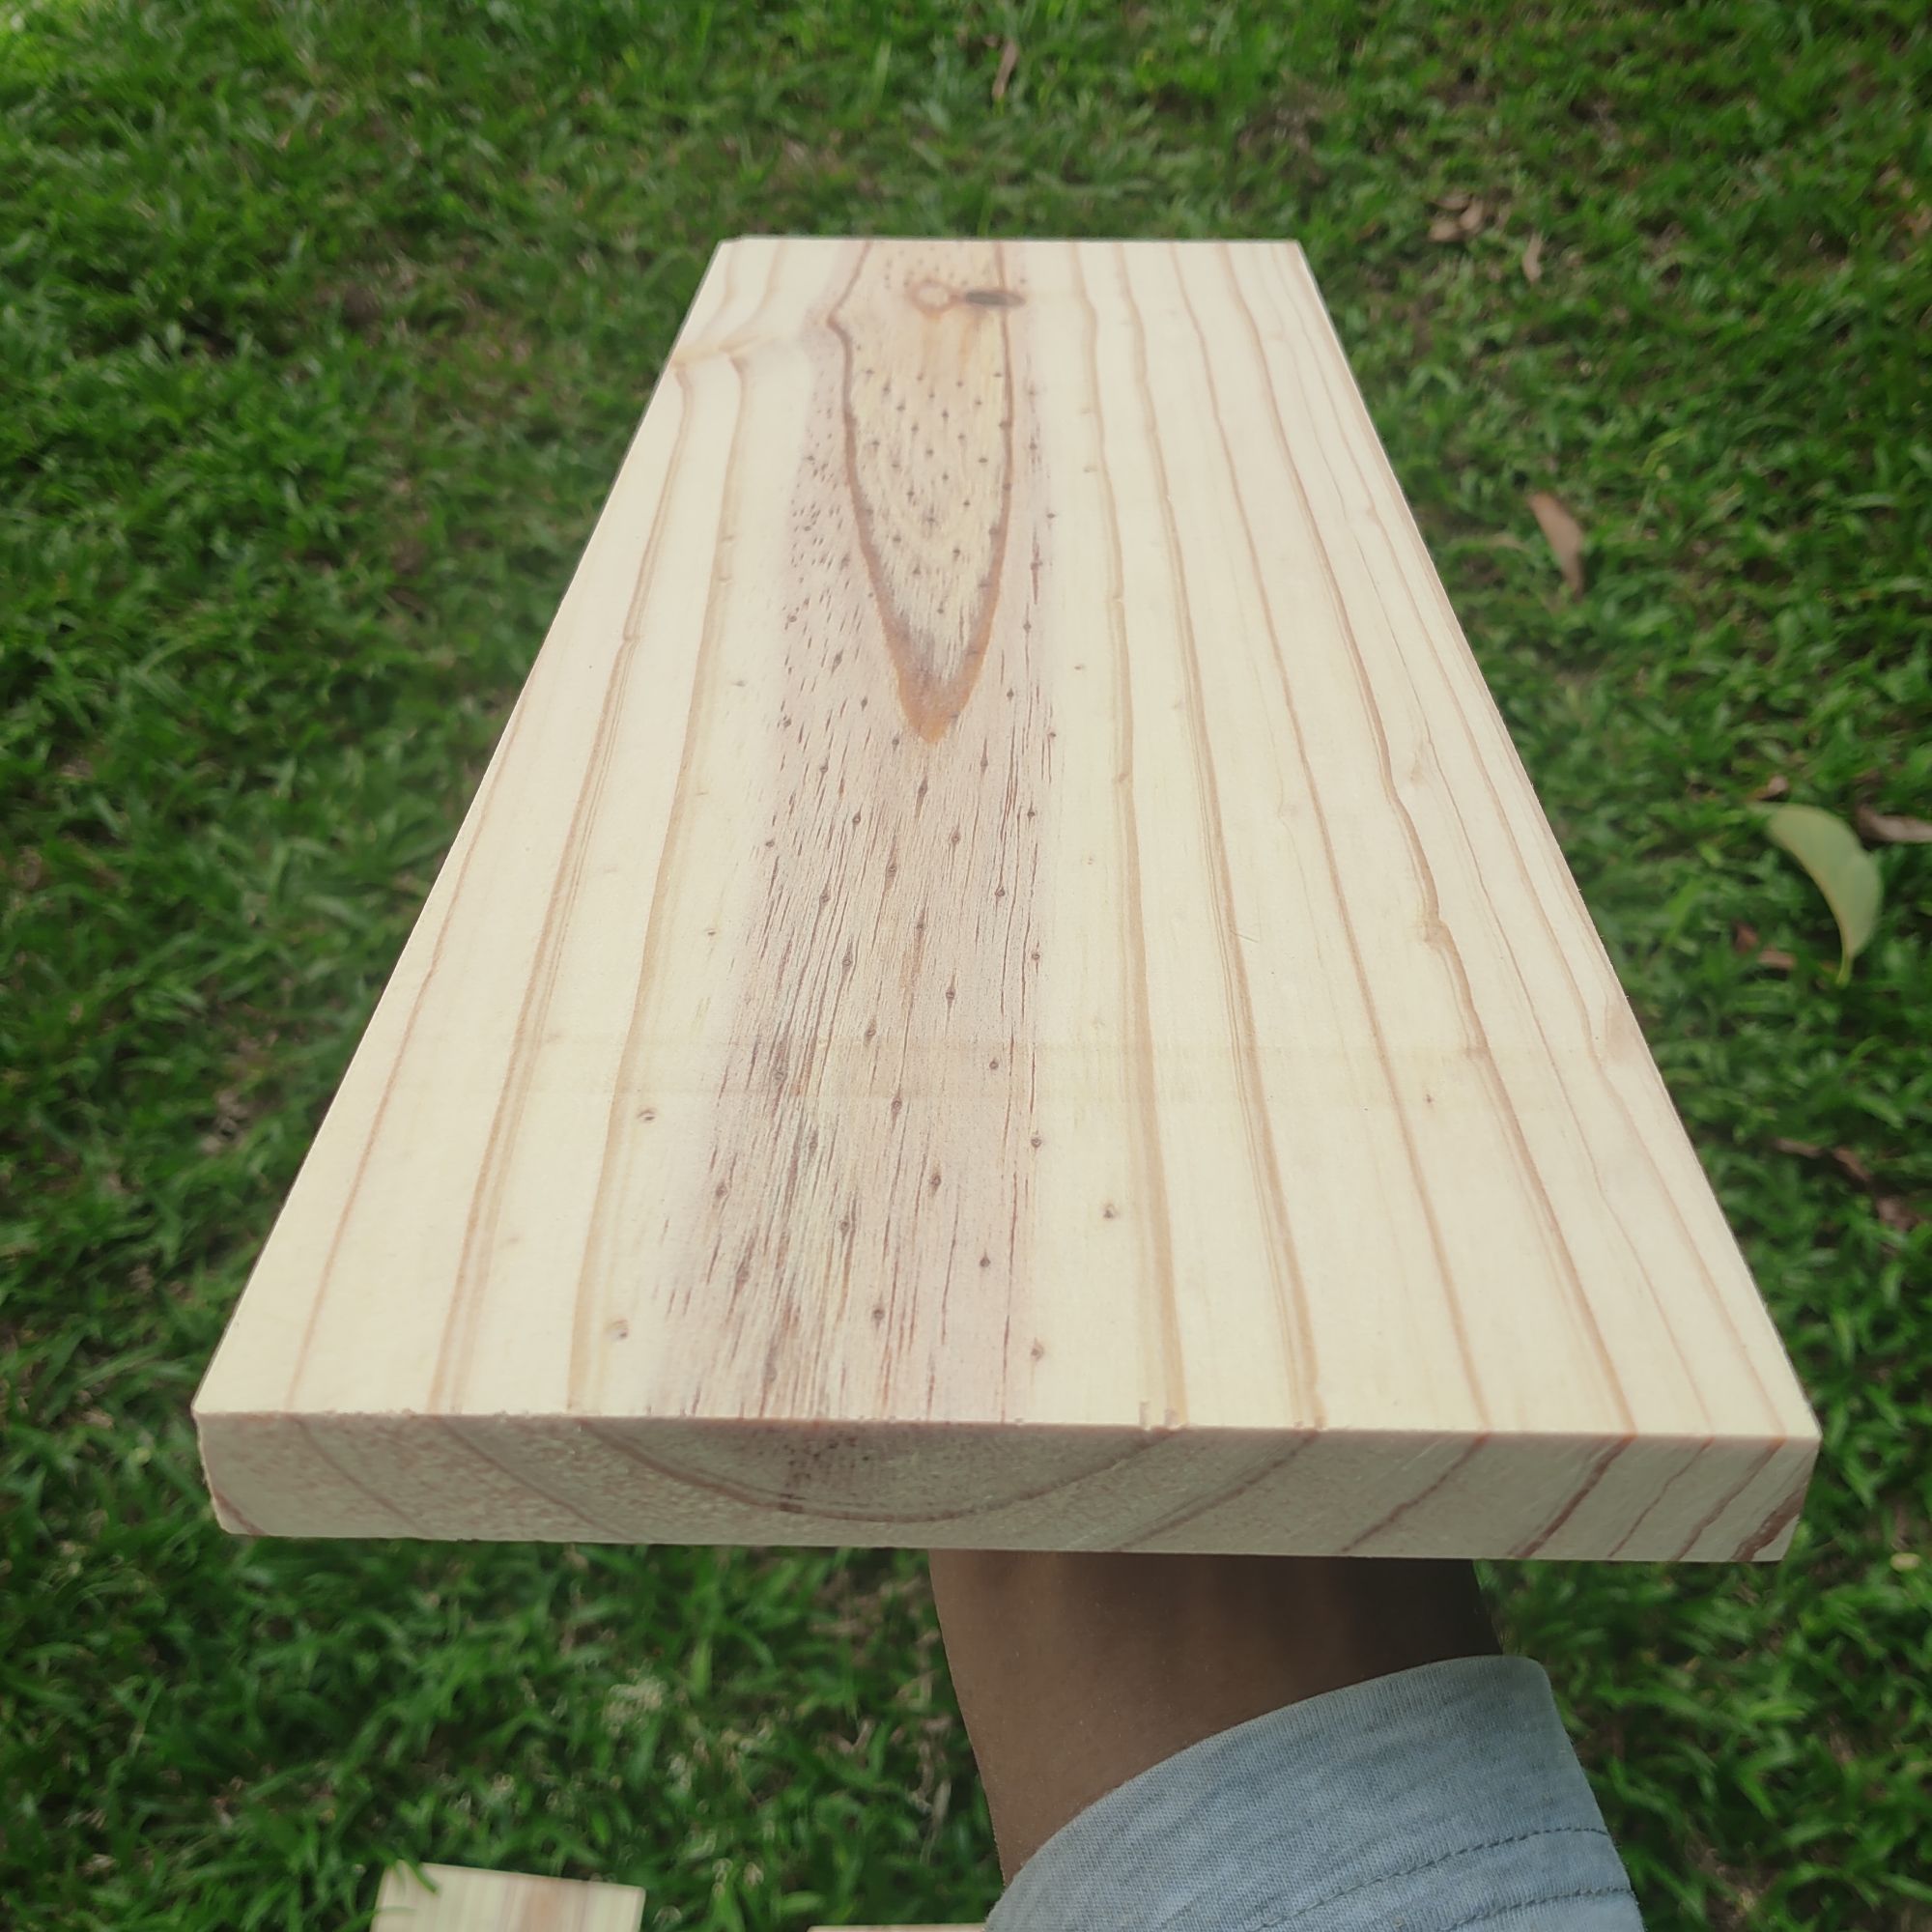 Wood Plank Made Of Pinewood For Hobbyist And Diy Lazada Ph 7139